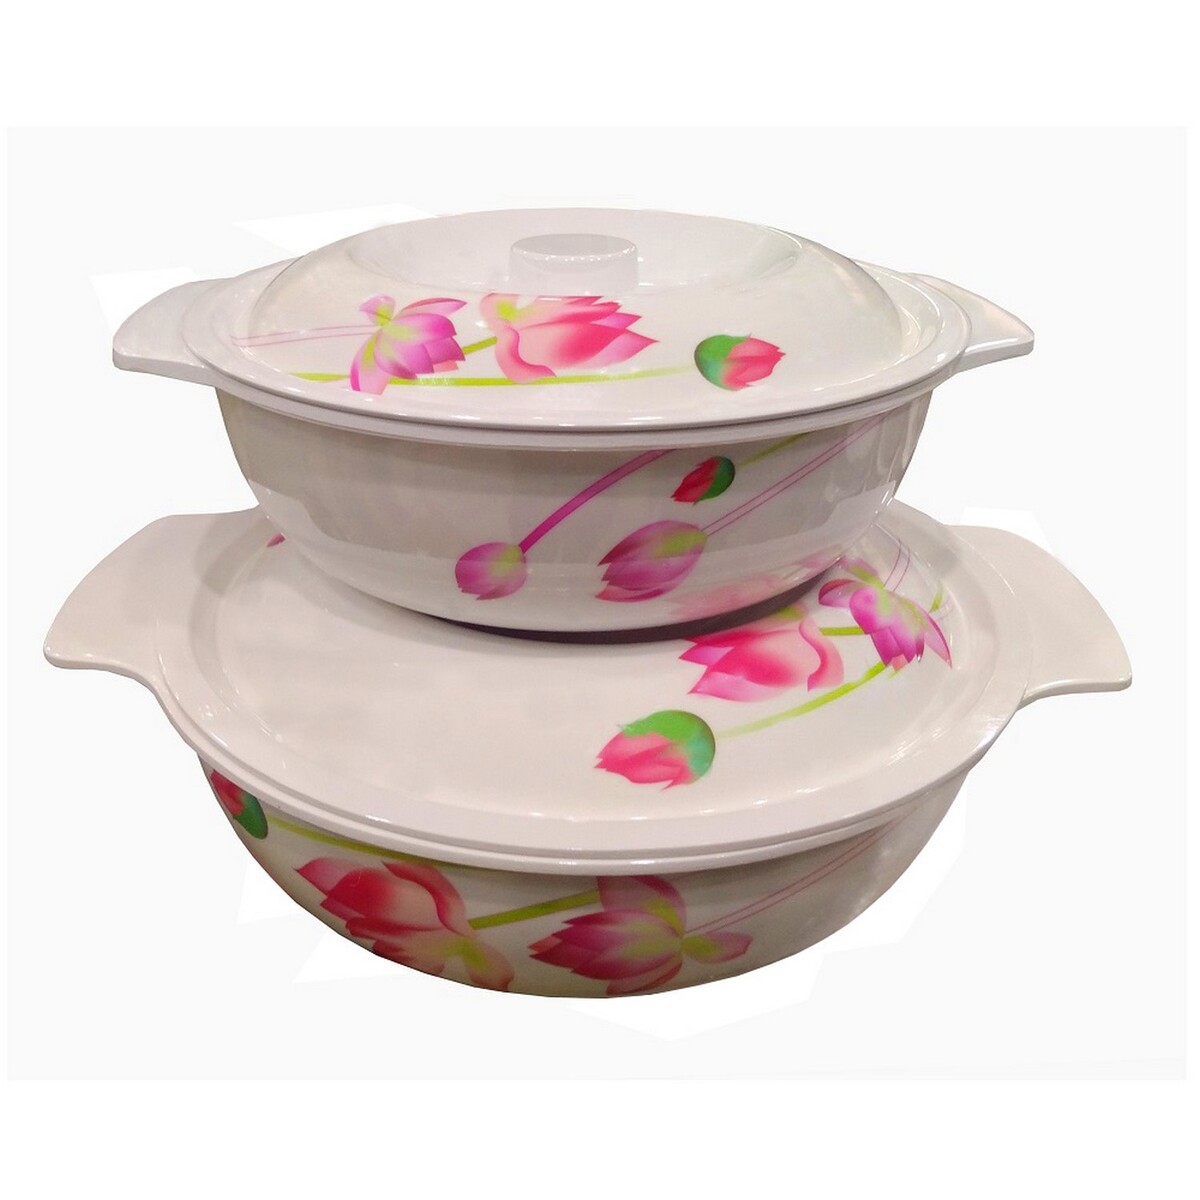 Superware Casserole With Lid 6.5 2PC Assorted 104